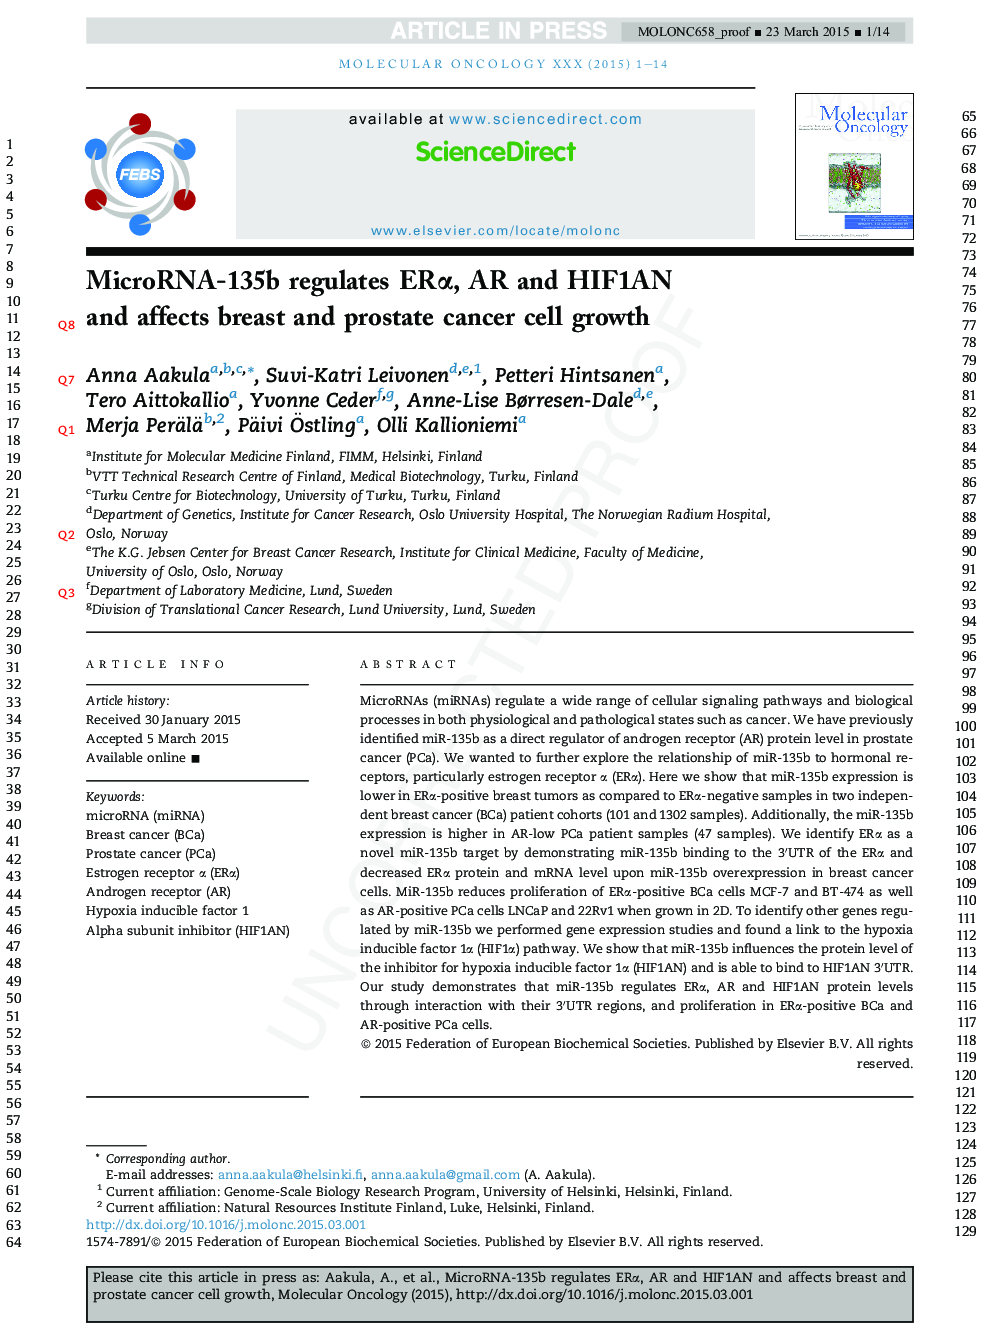 MicroRNA-135b regulates ERÎ±, AR and HIF1AN and affects breast and prostate cancer cell growth